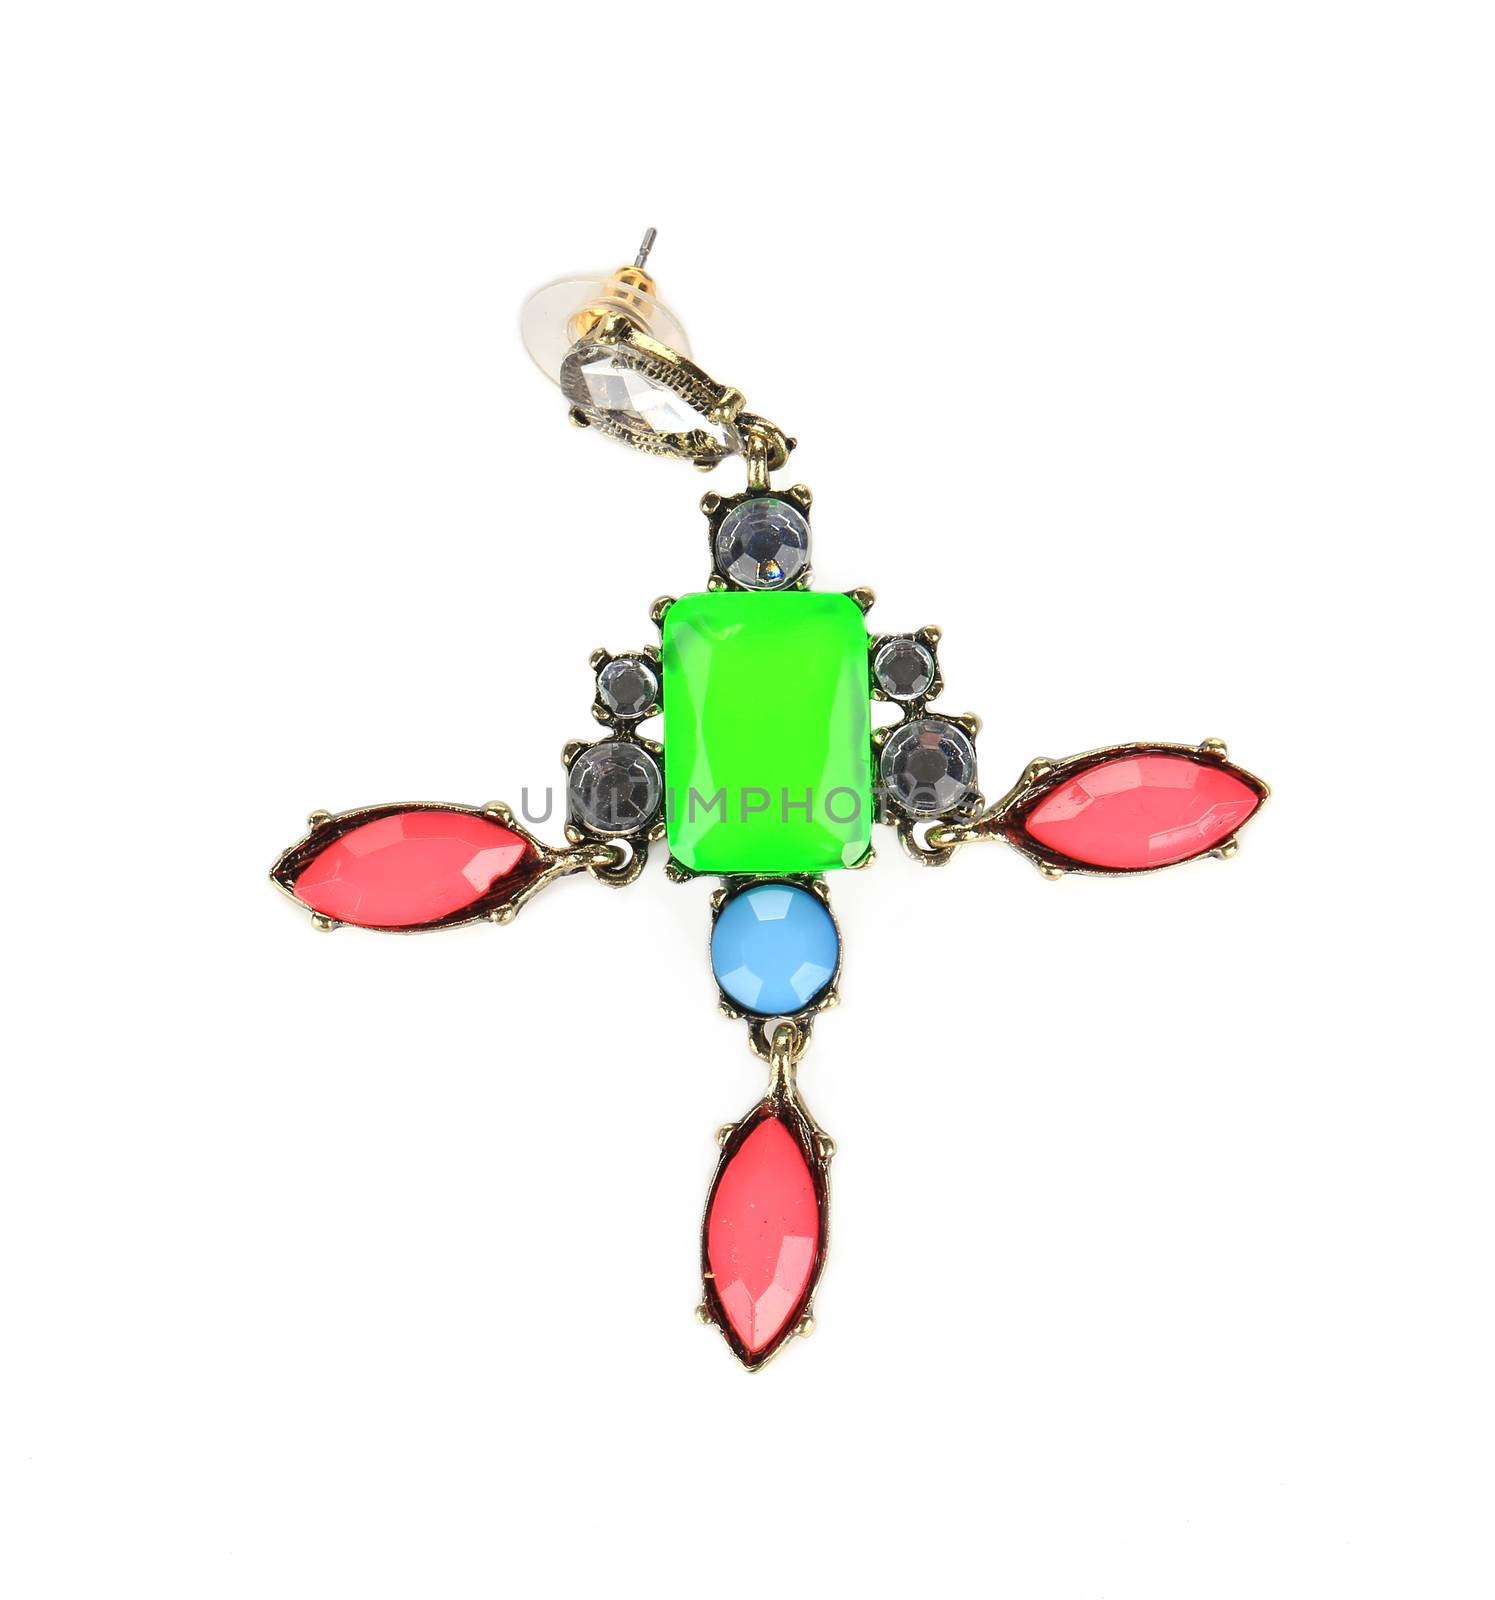 Brooch with different gems. Isolated on a white background.